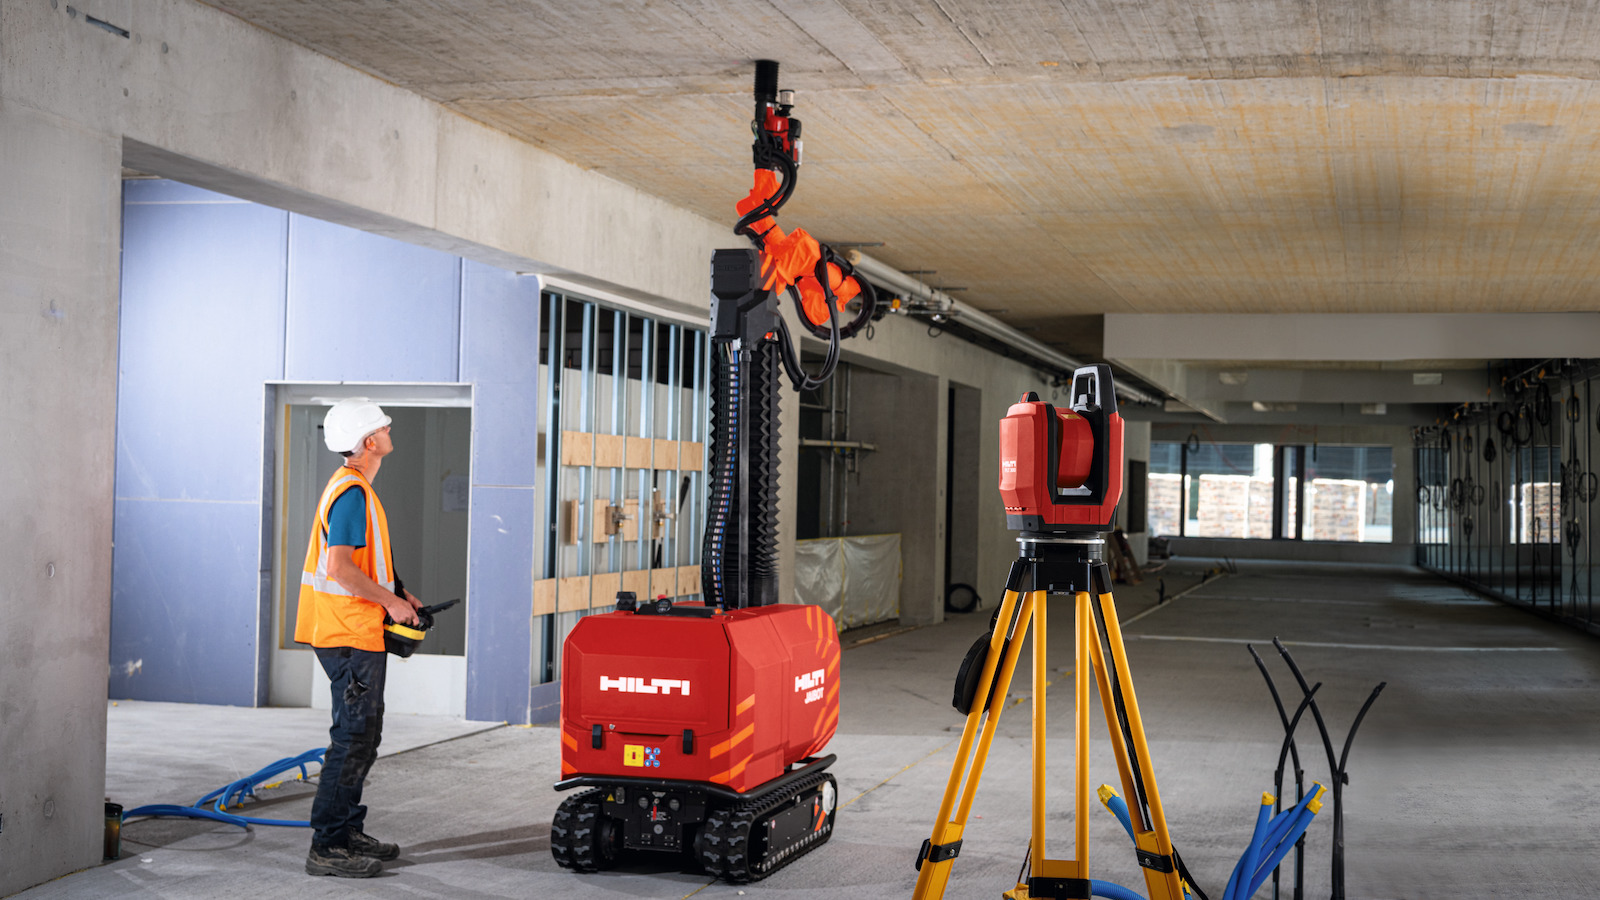 Hilti’s Jaibot removes the tough work of repetitive overhead drilling from humans